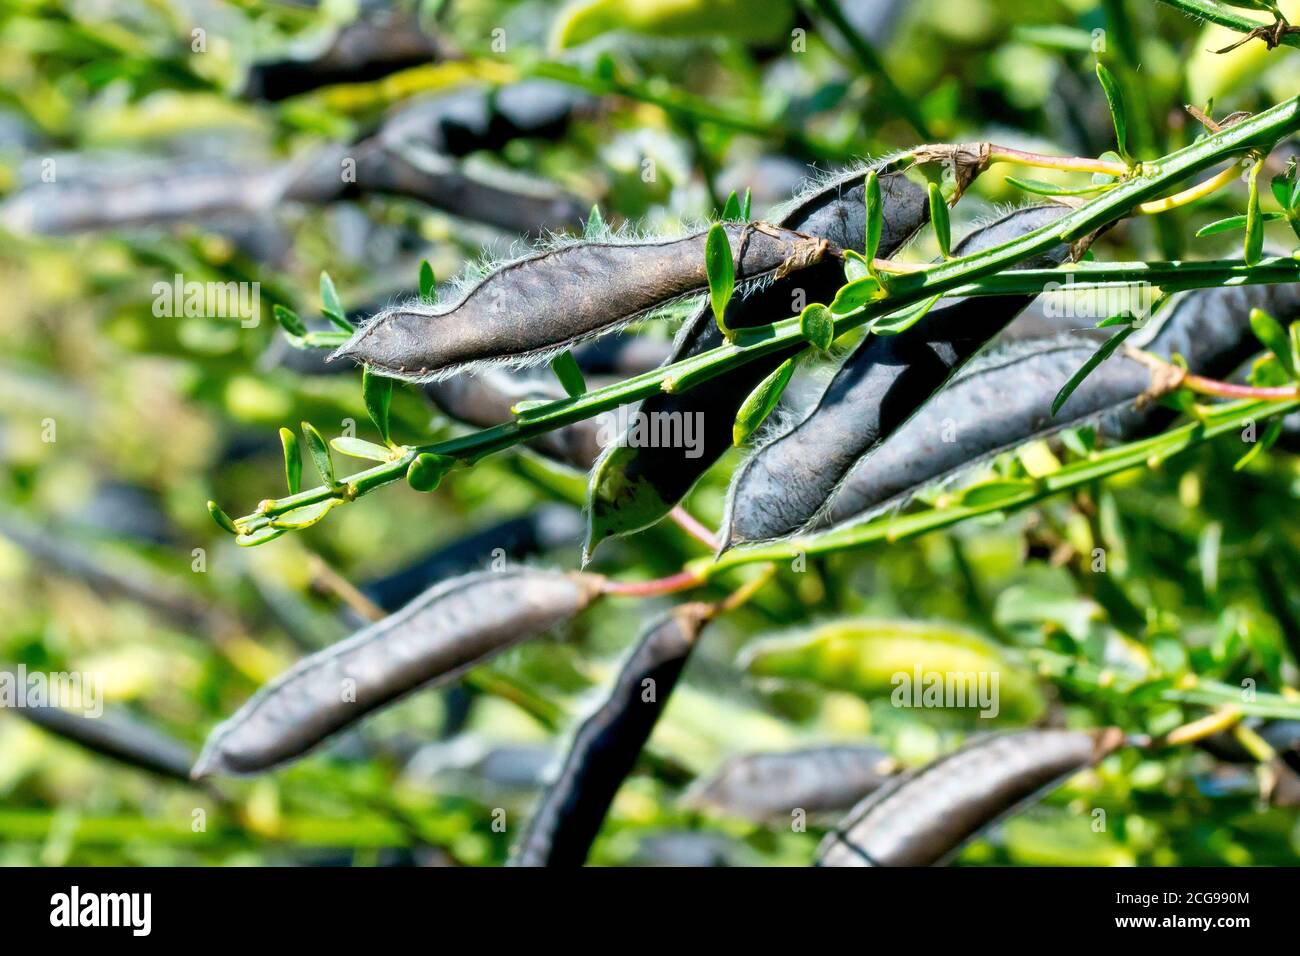 Broom (cytisus scoparius), close up of several mature black pea-like seed pods. Stock Photo